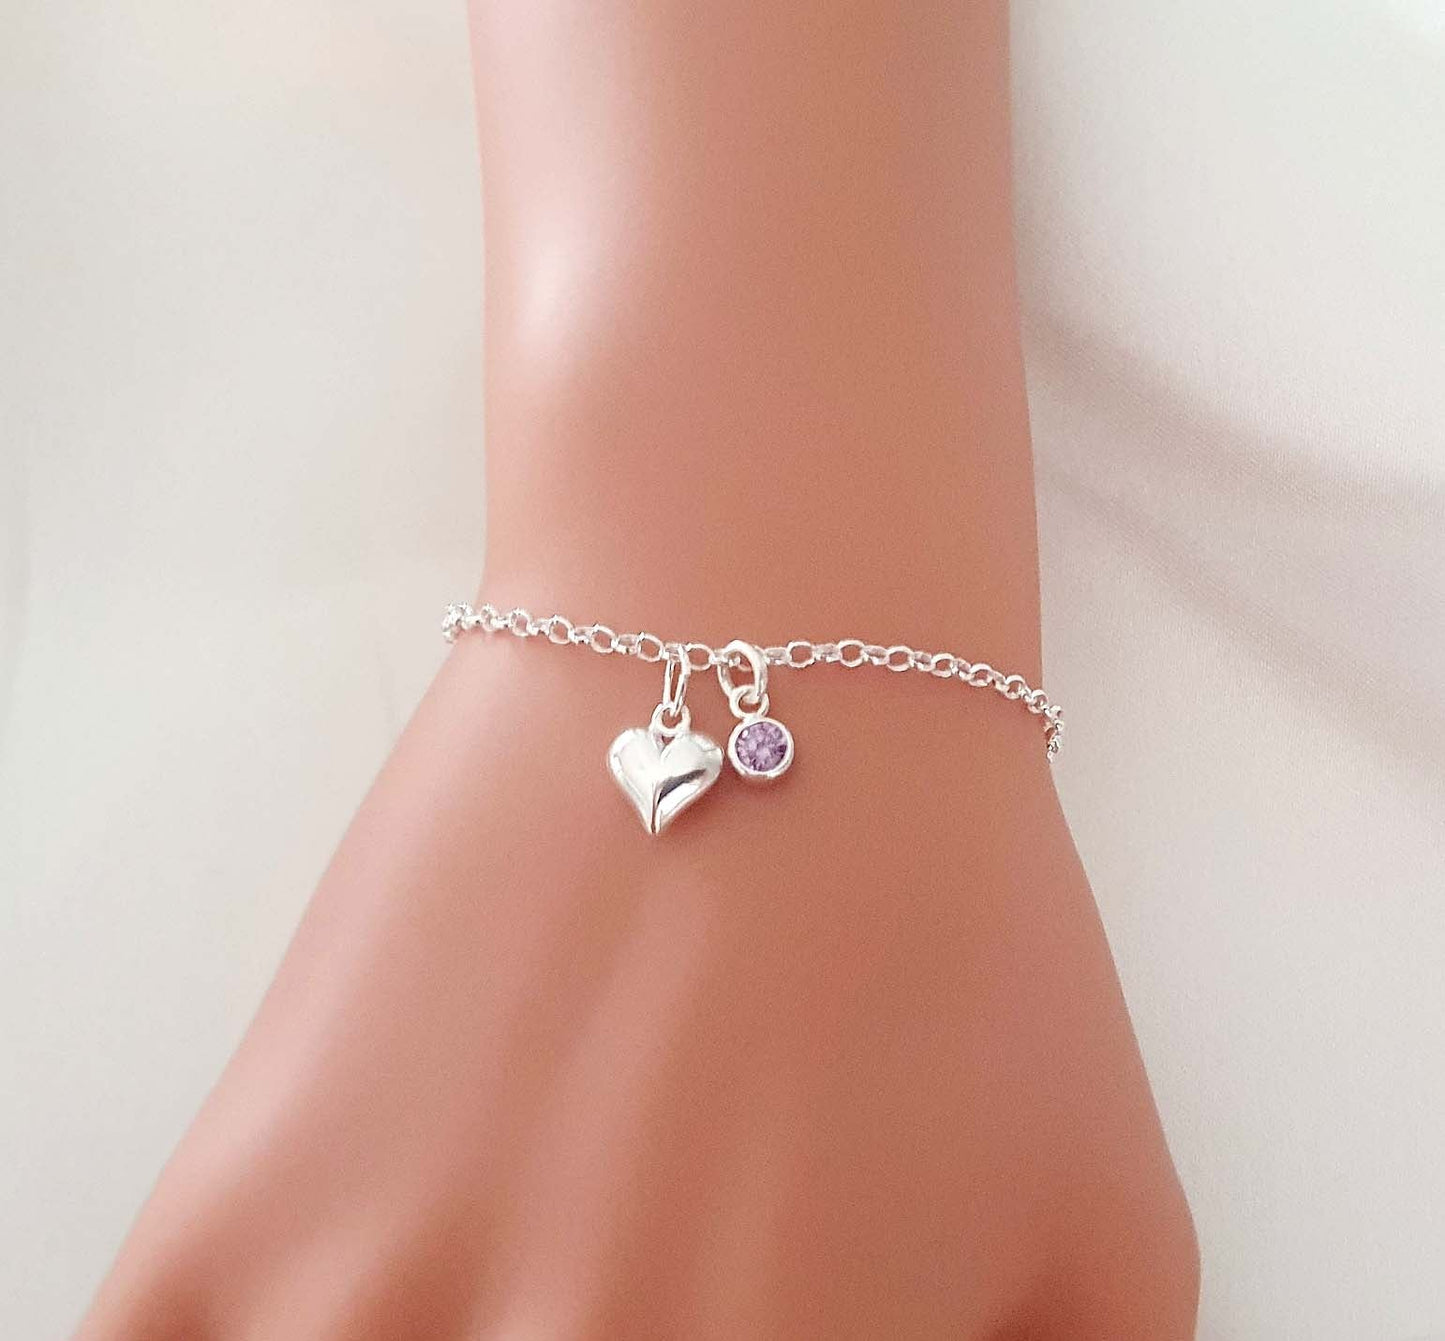 Best Friend Puffy Heart Bracelet with Birthstone in Sterling Silver 925, Personalised Gift